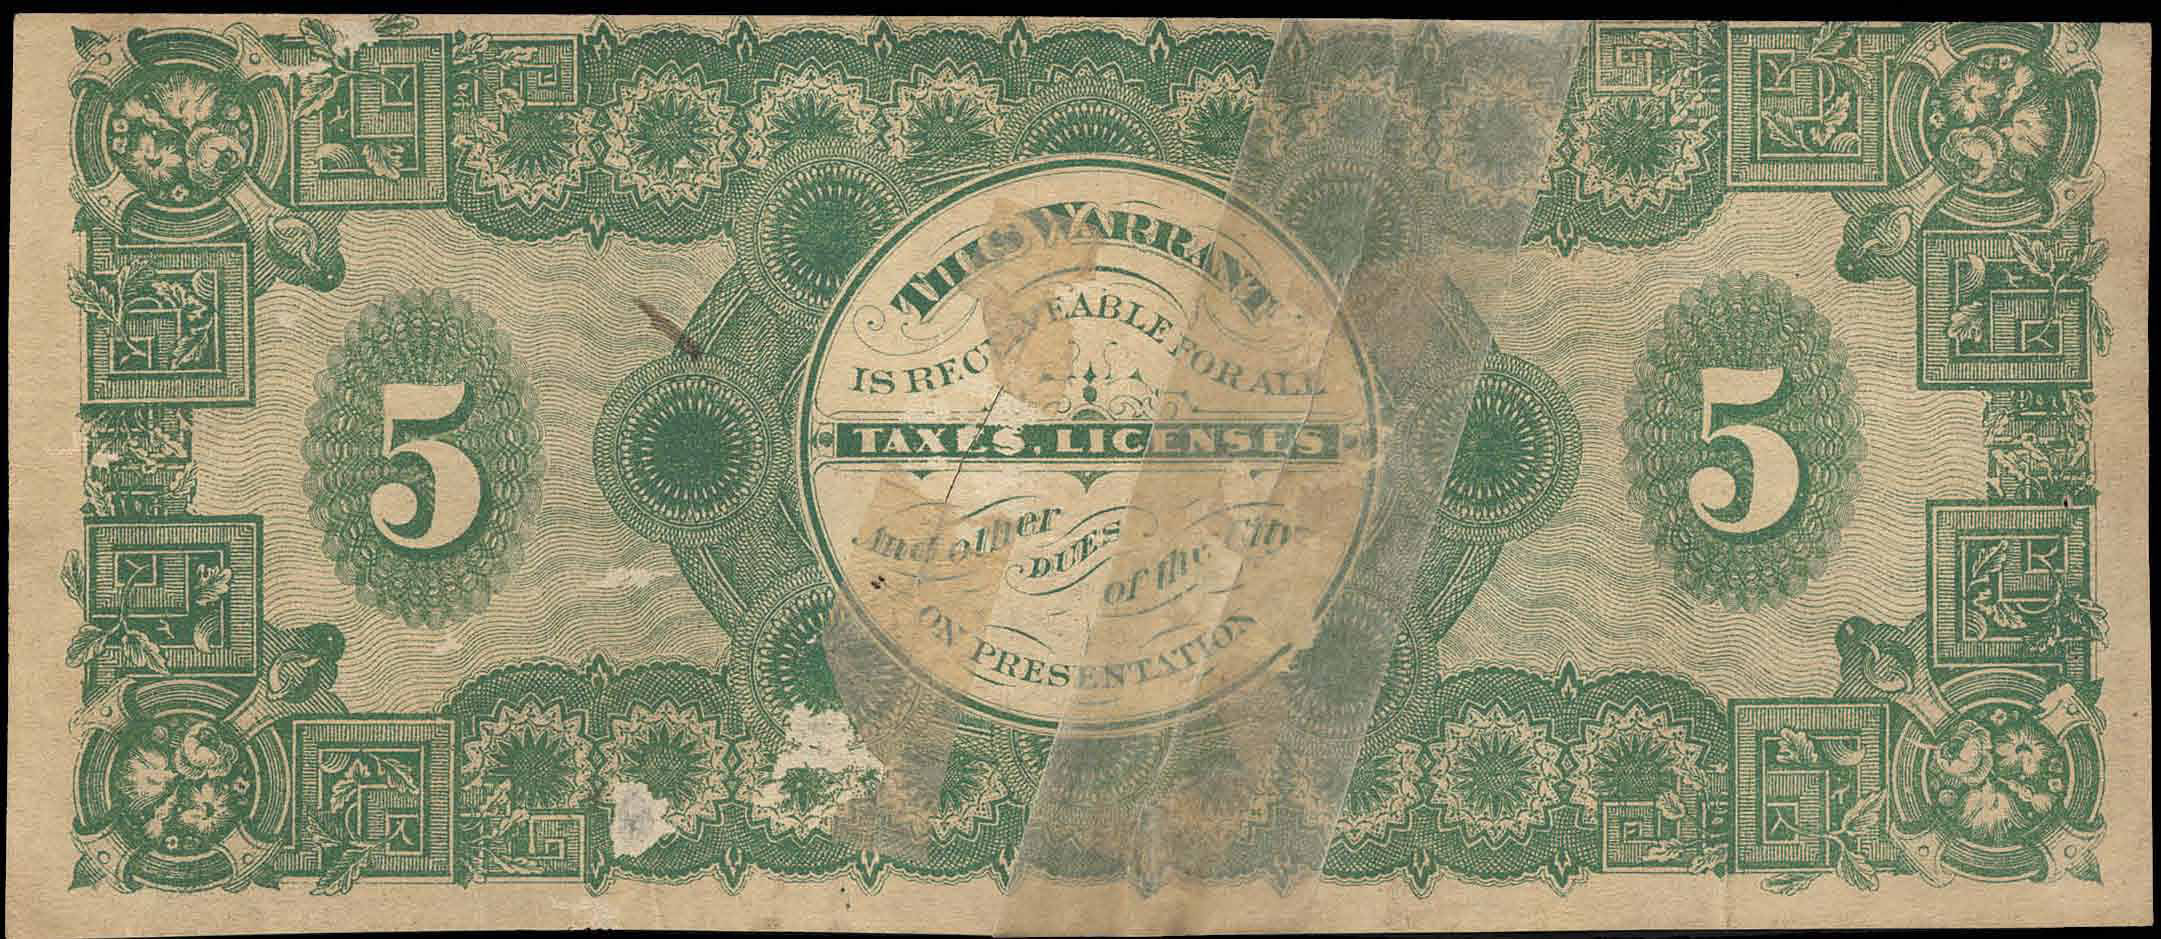 $5 G-1298.05 T3 City Chattanooga 1875 back